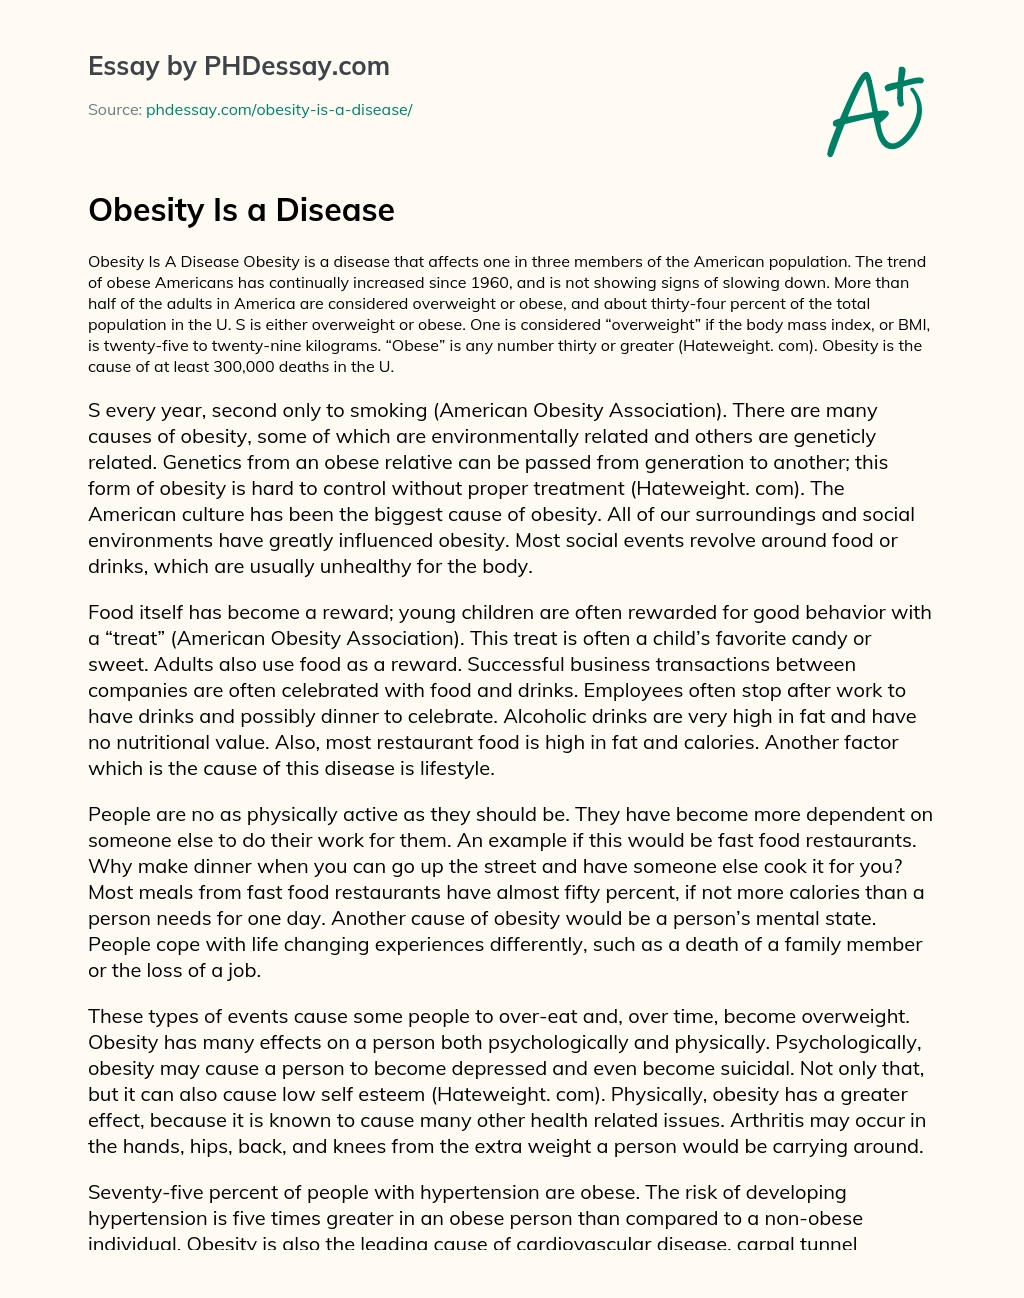 obesity and heart disease essay